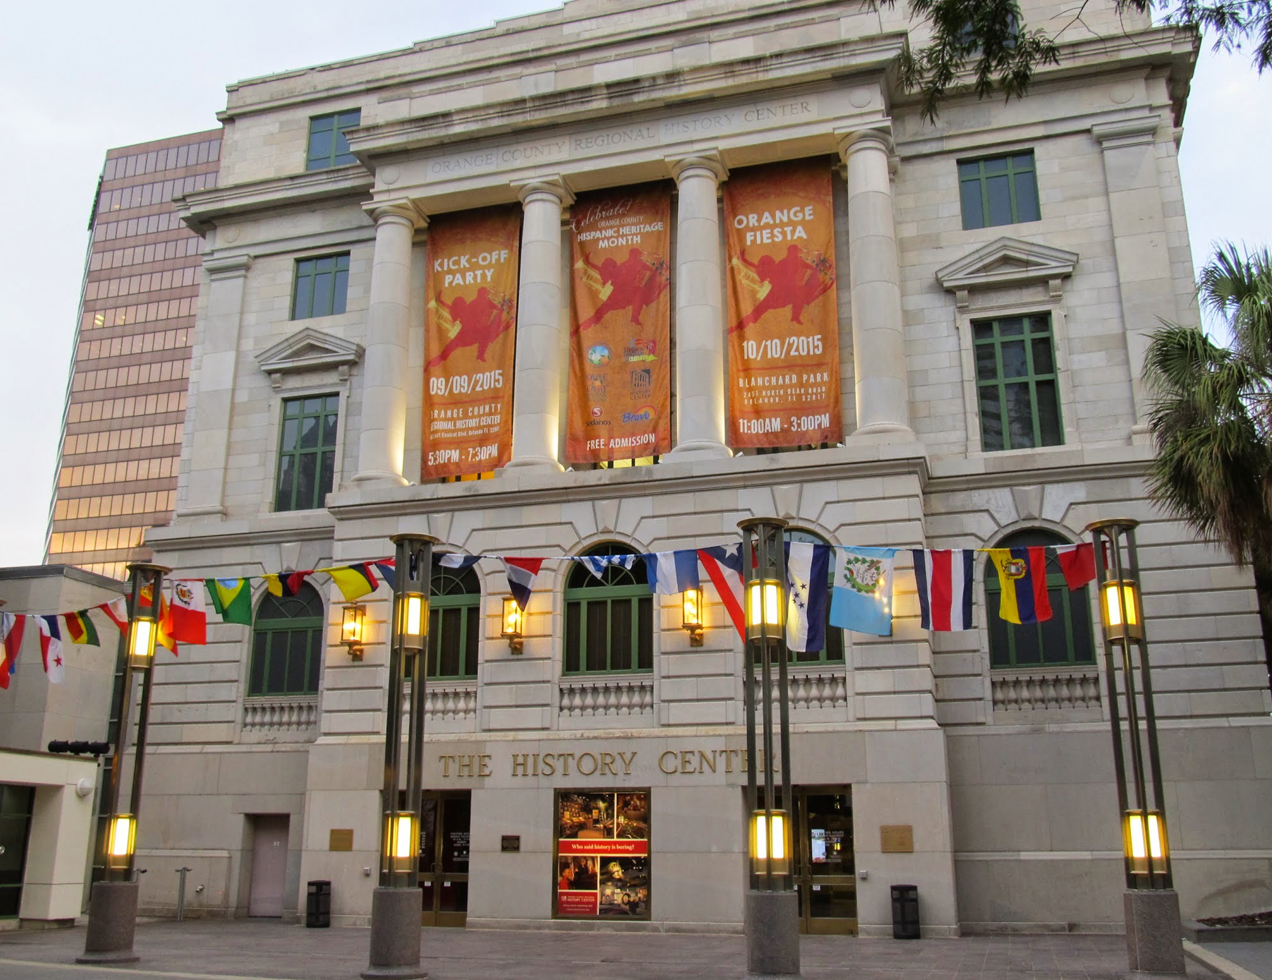 Orlando History Center is located in Downtown Orlando